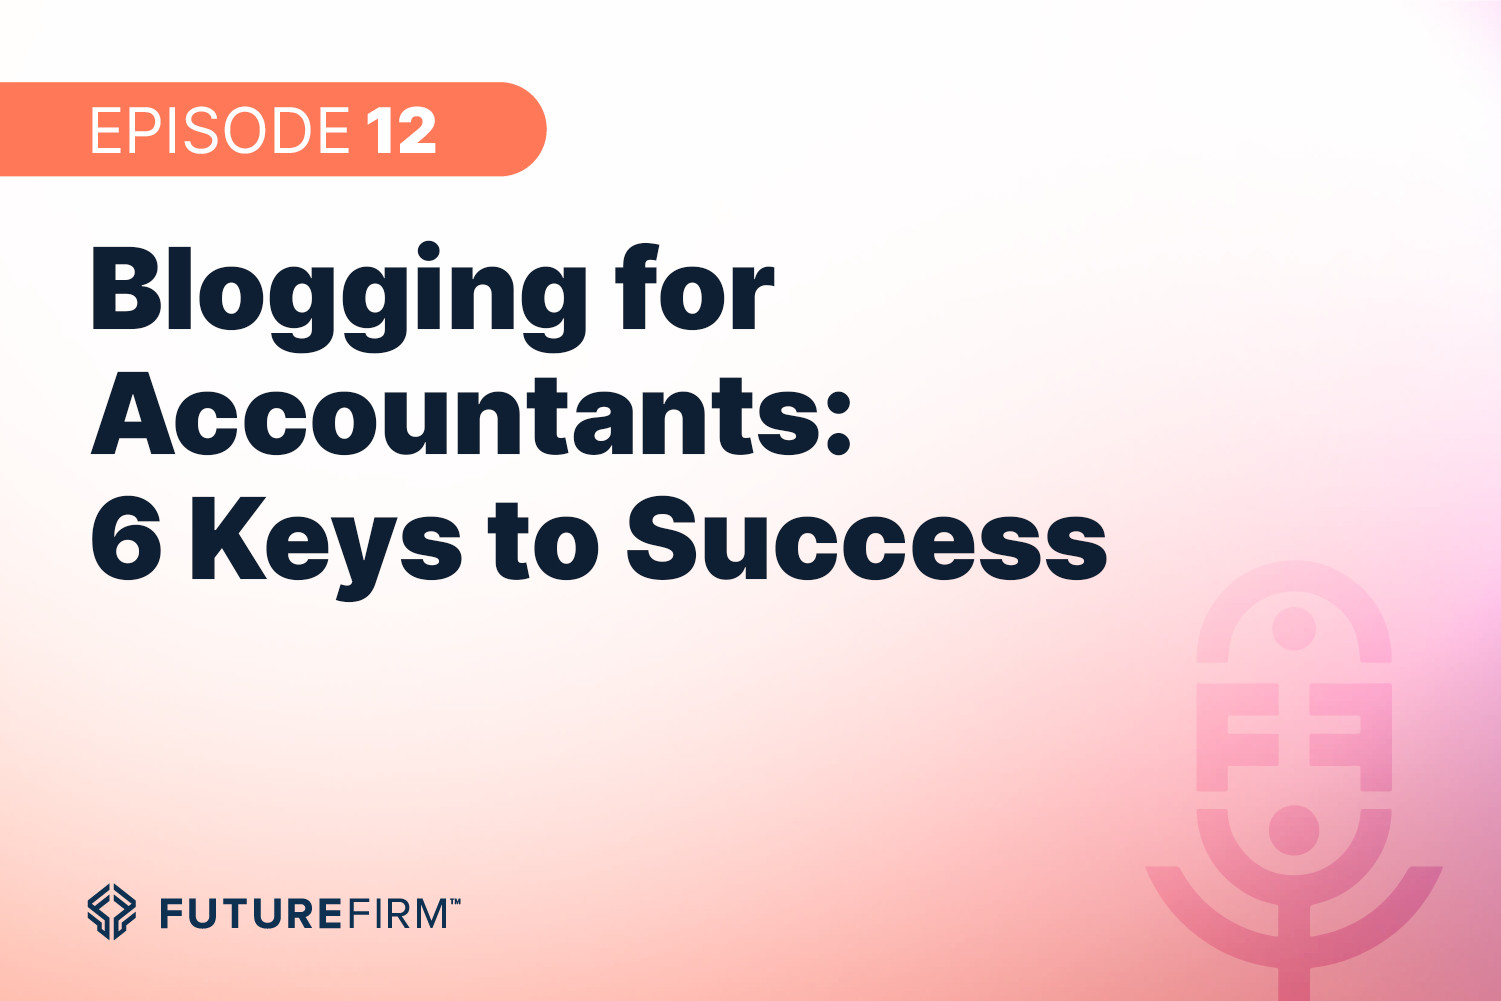 Blogging for Accountants: 6 Keys to Success